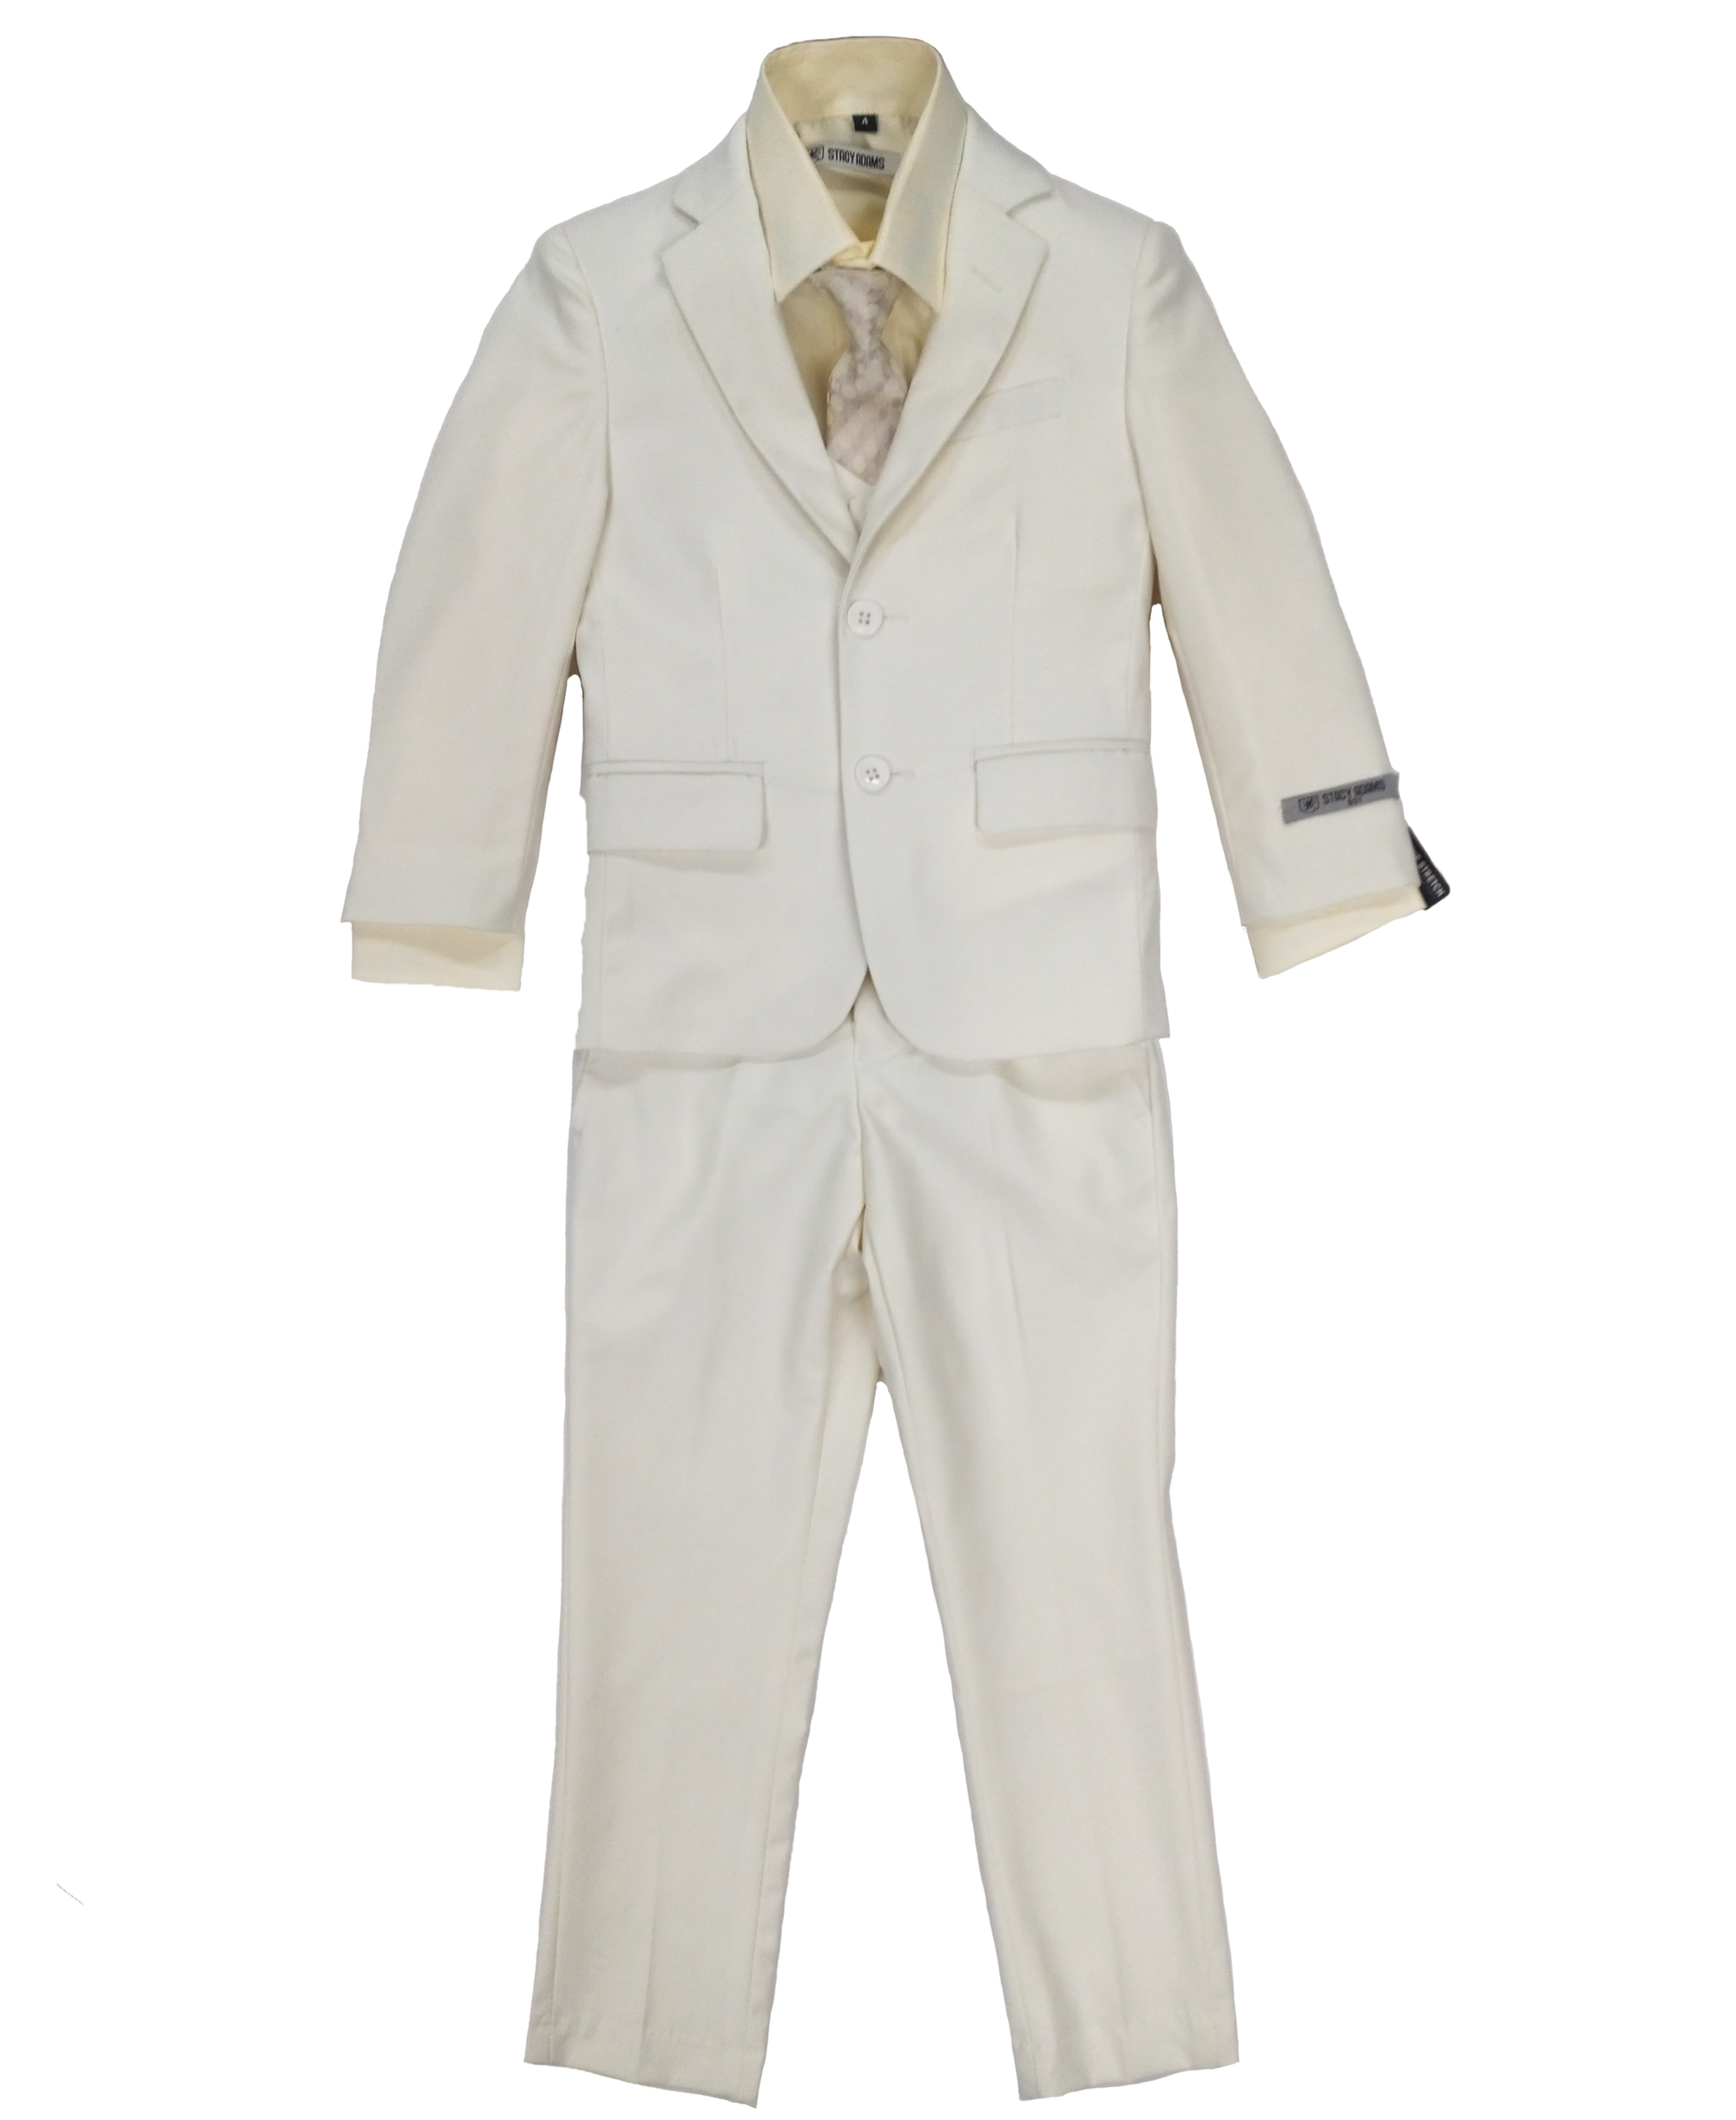 Boys Stacy Adams Ivory 5 pc Suits